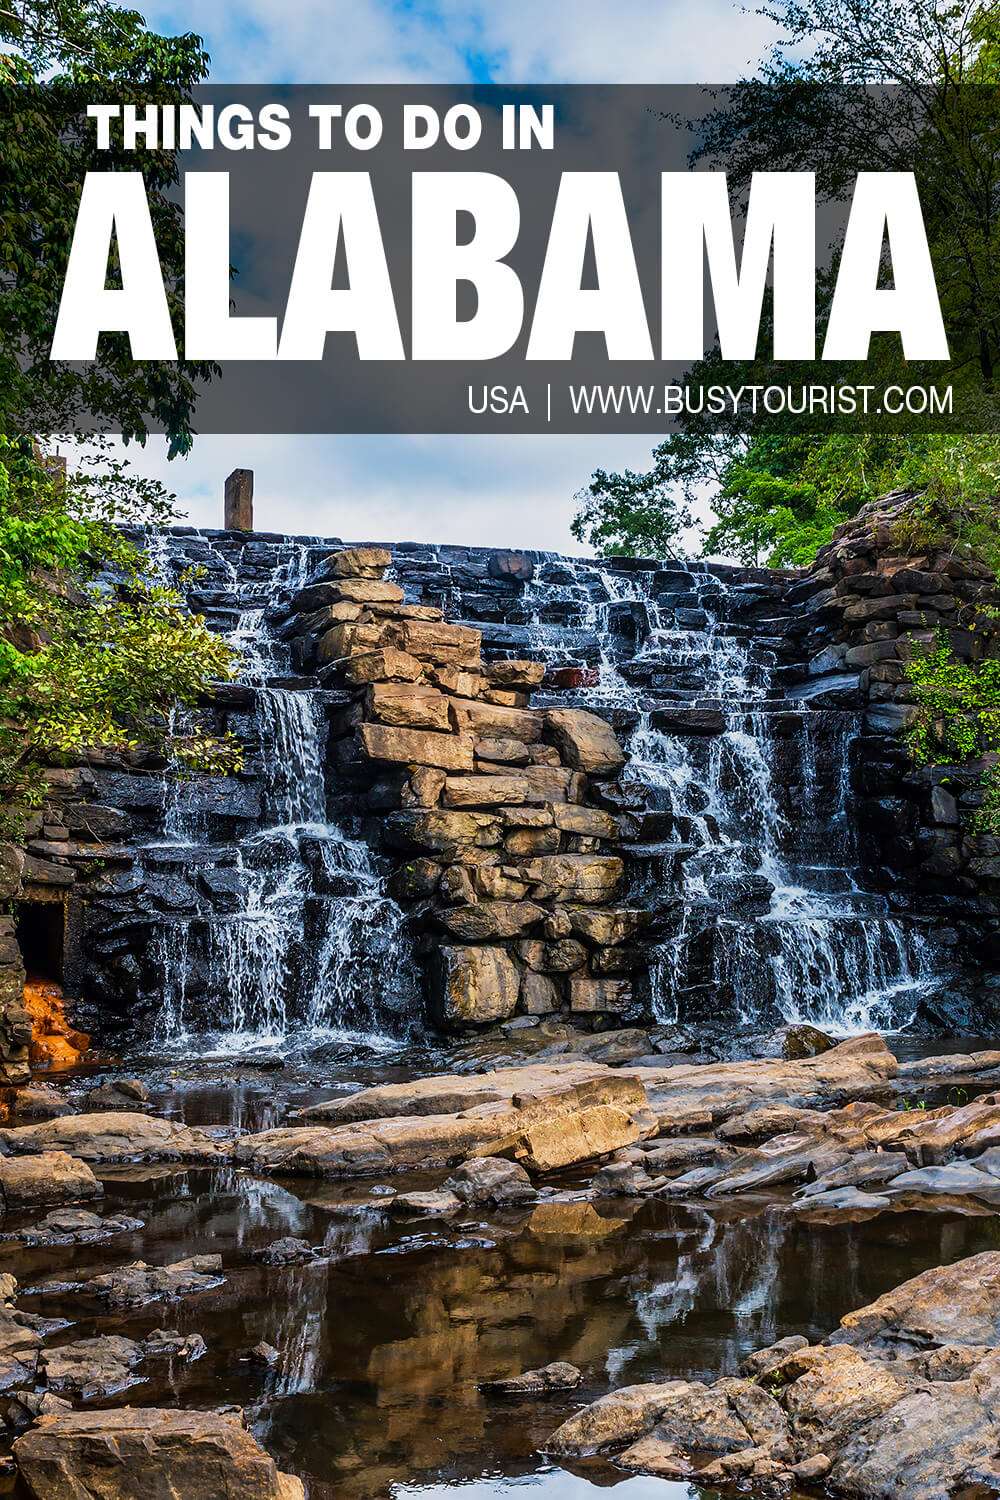 south alabama places to visit